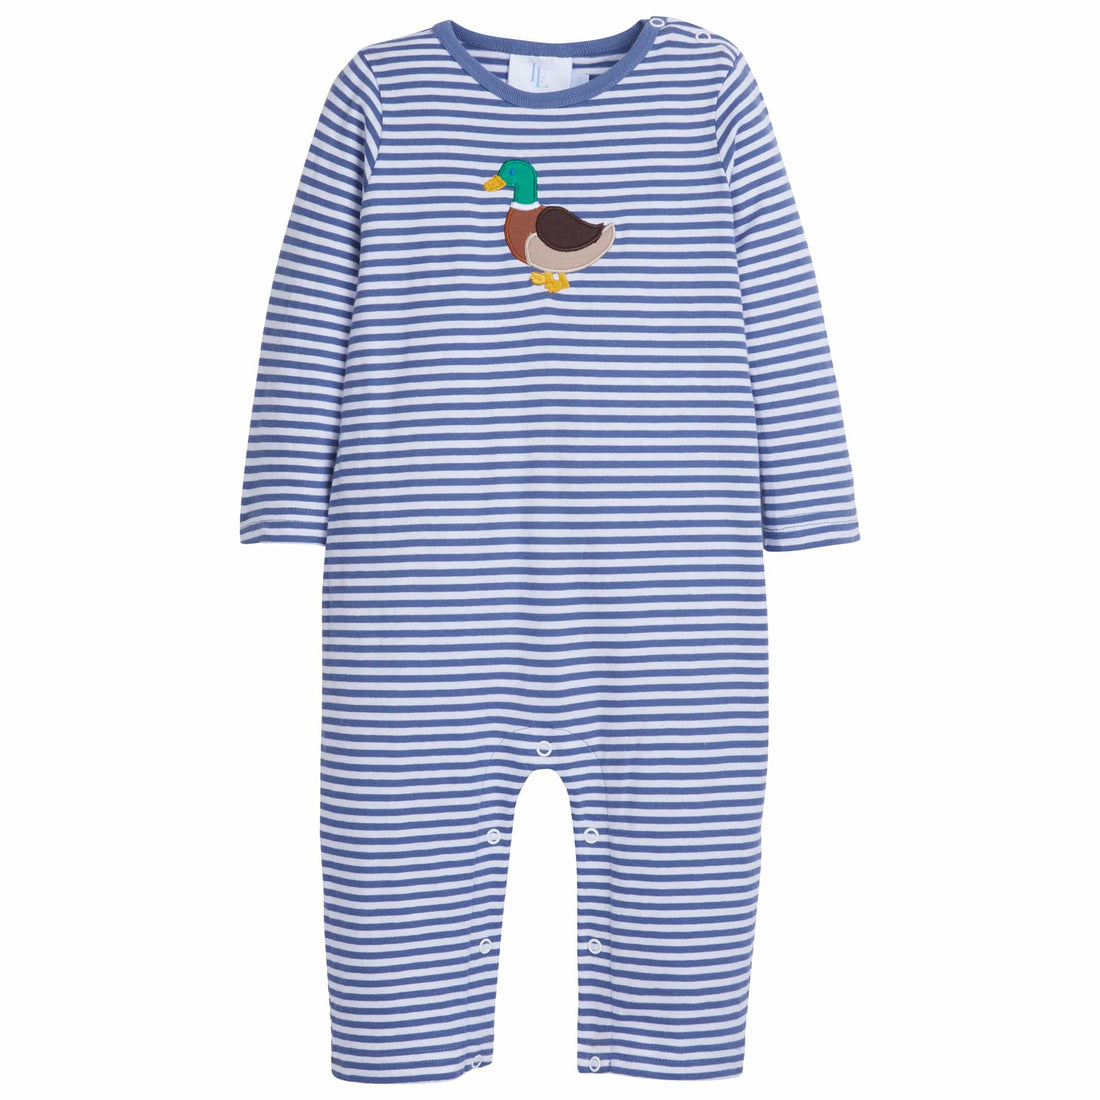 little english classic childrens clothing boys blue striped romper with applique mallard